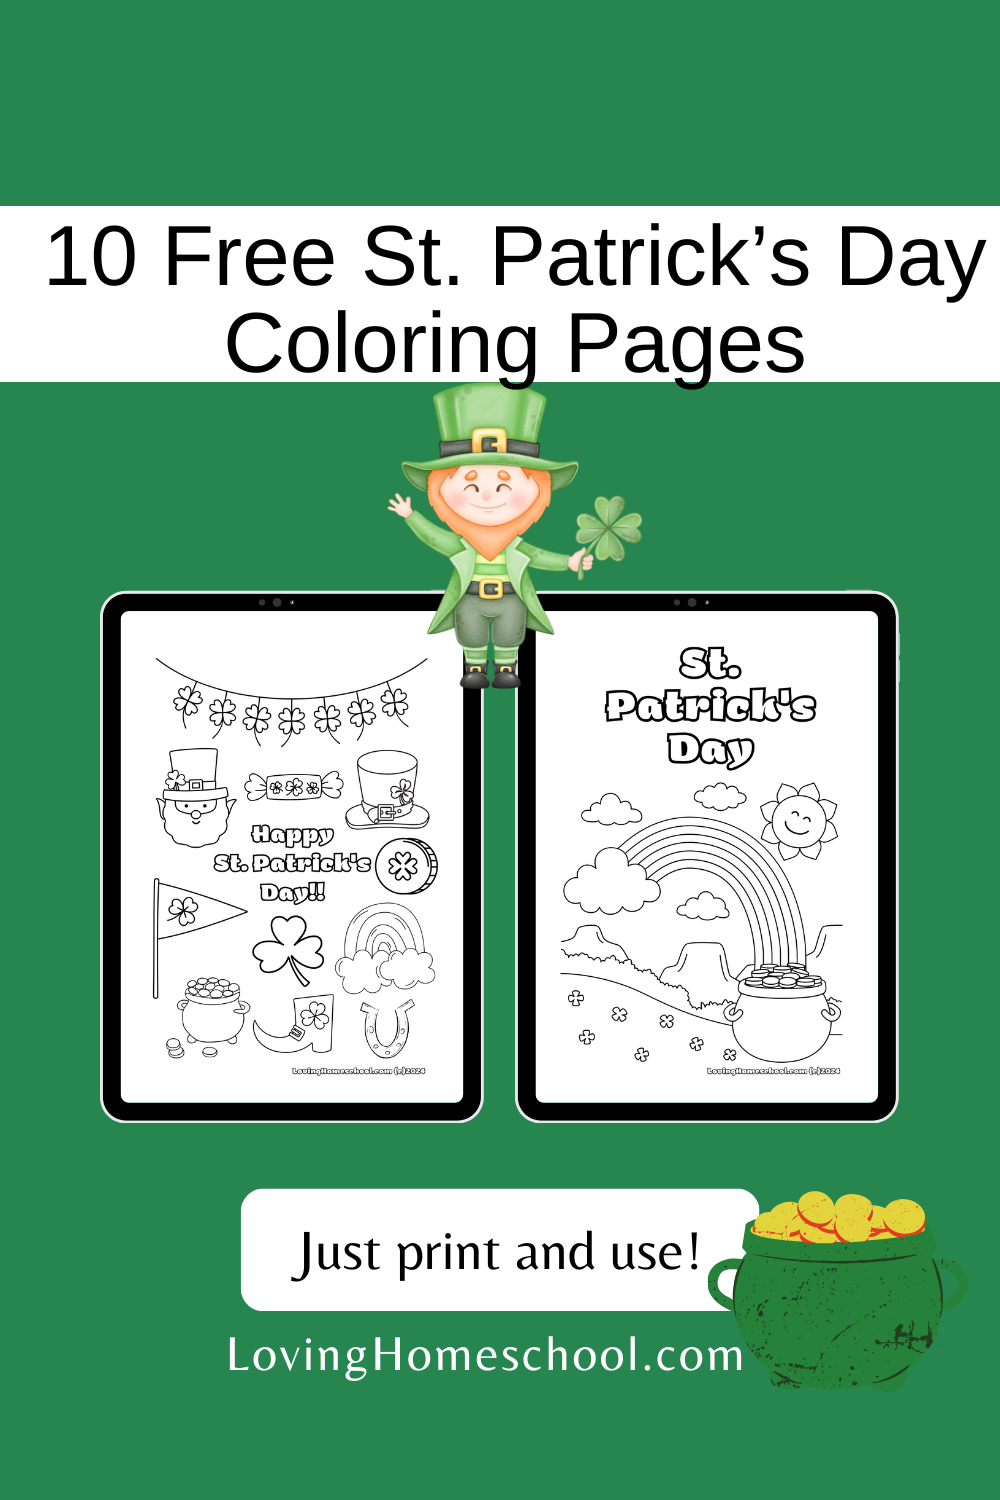 Free St. Patrick’s Day Coloring Pages